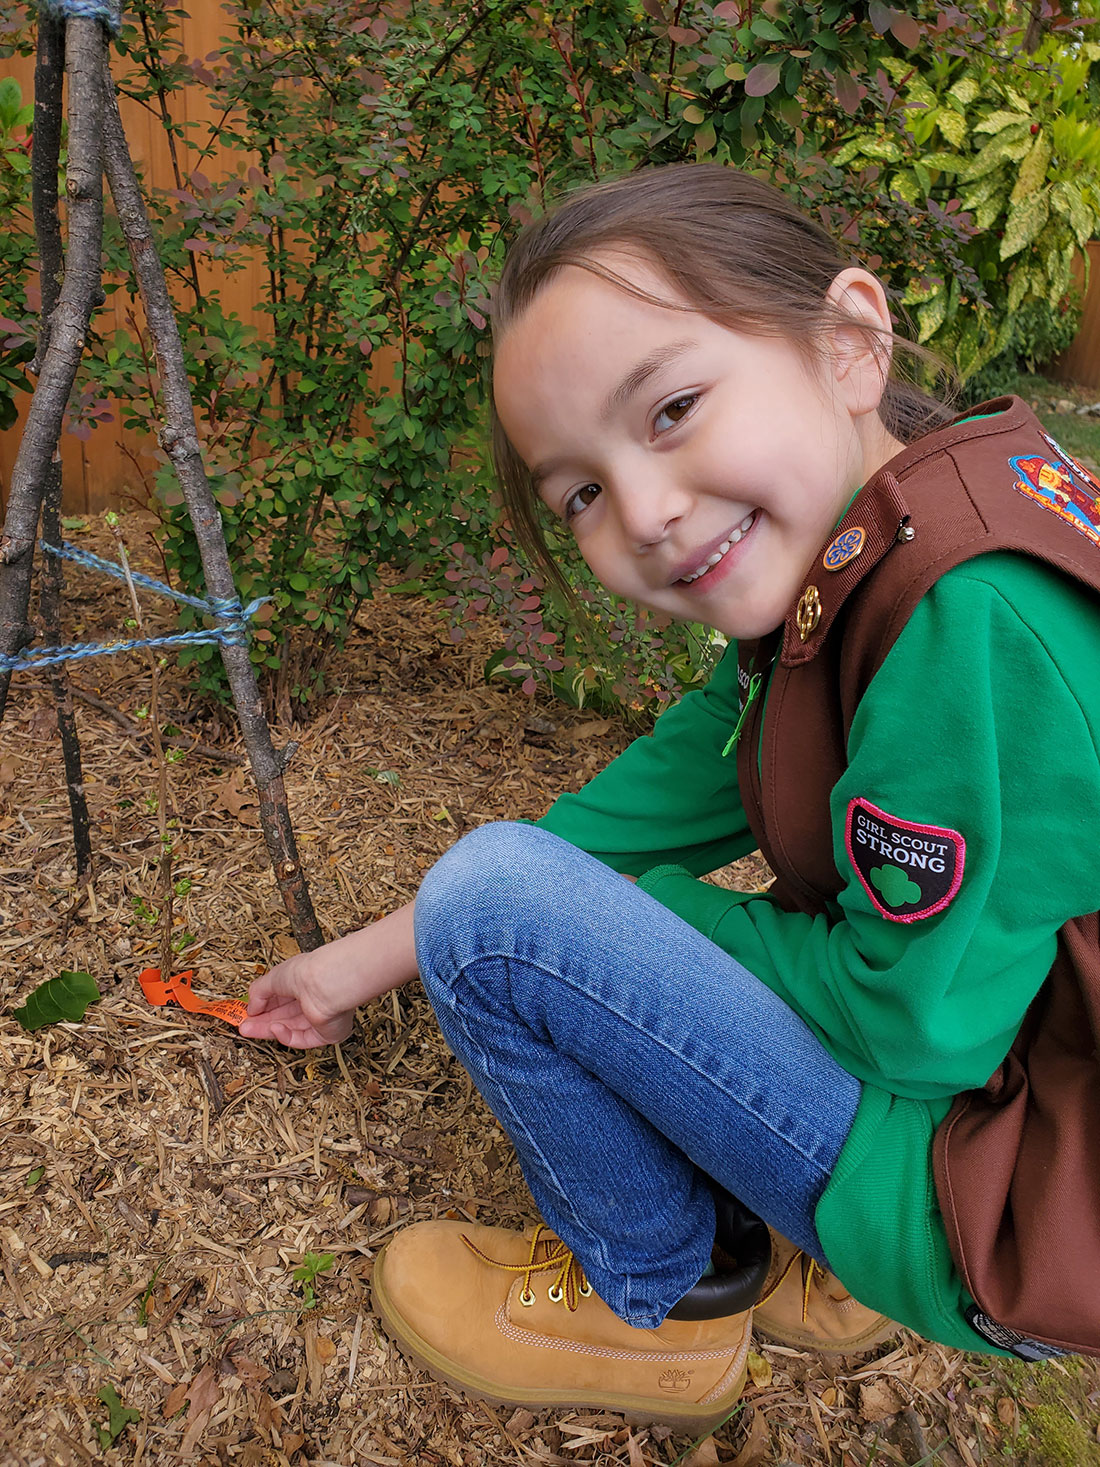 In 2020, American Forests partnered with Girl Scouts of the USA to support the launch of the Girl Scout Tree Promise program, an initiative that is empowering scouts — like the Girl Scout Brownie with Girl Scouts of Nation’s Capitol pictured here — to help plant 5 million trees over the next five years.